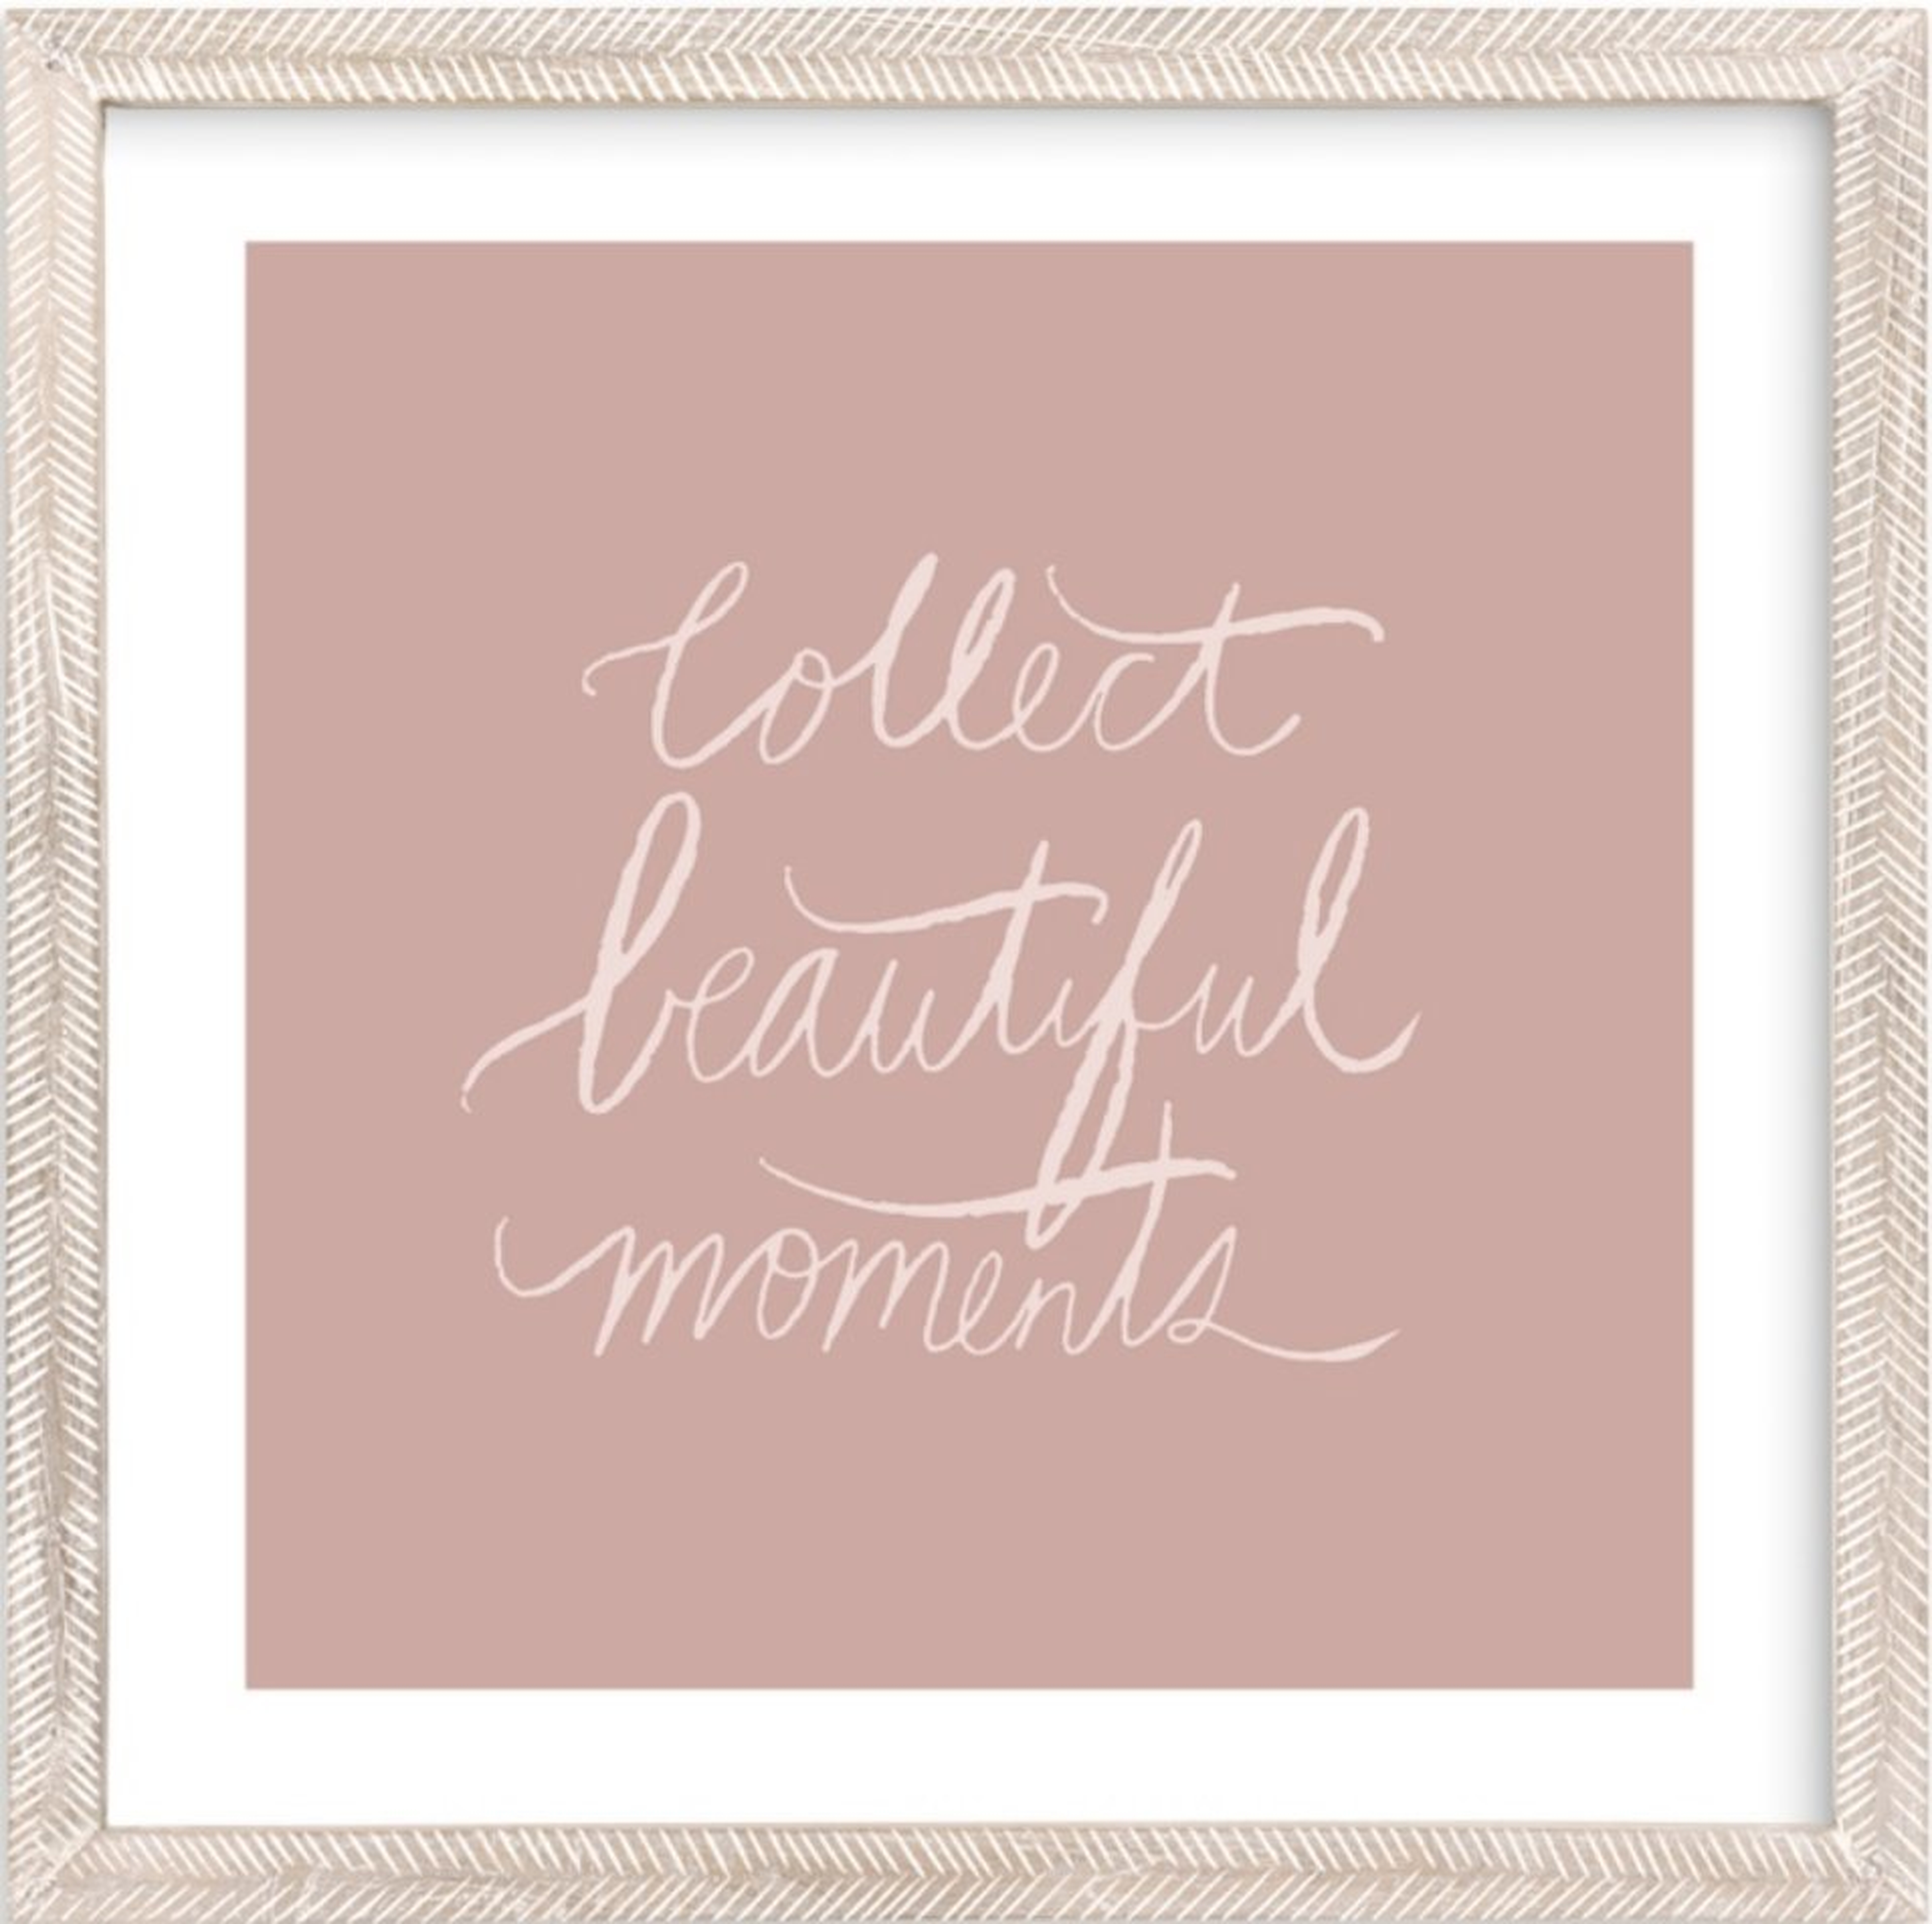 Collect Beautiful Moments Limited Edition Children's Art Print - Minted